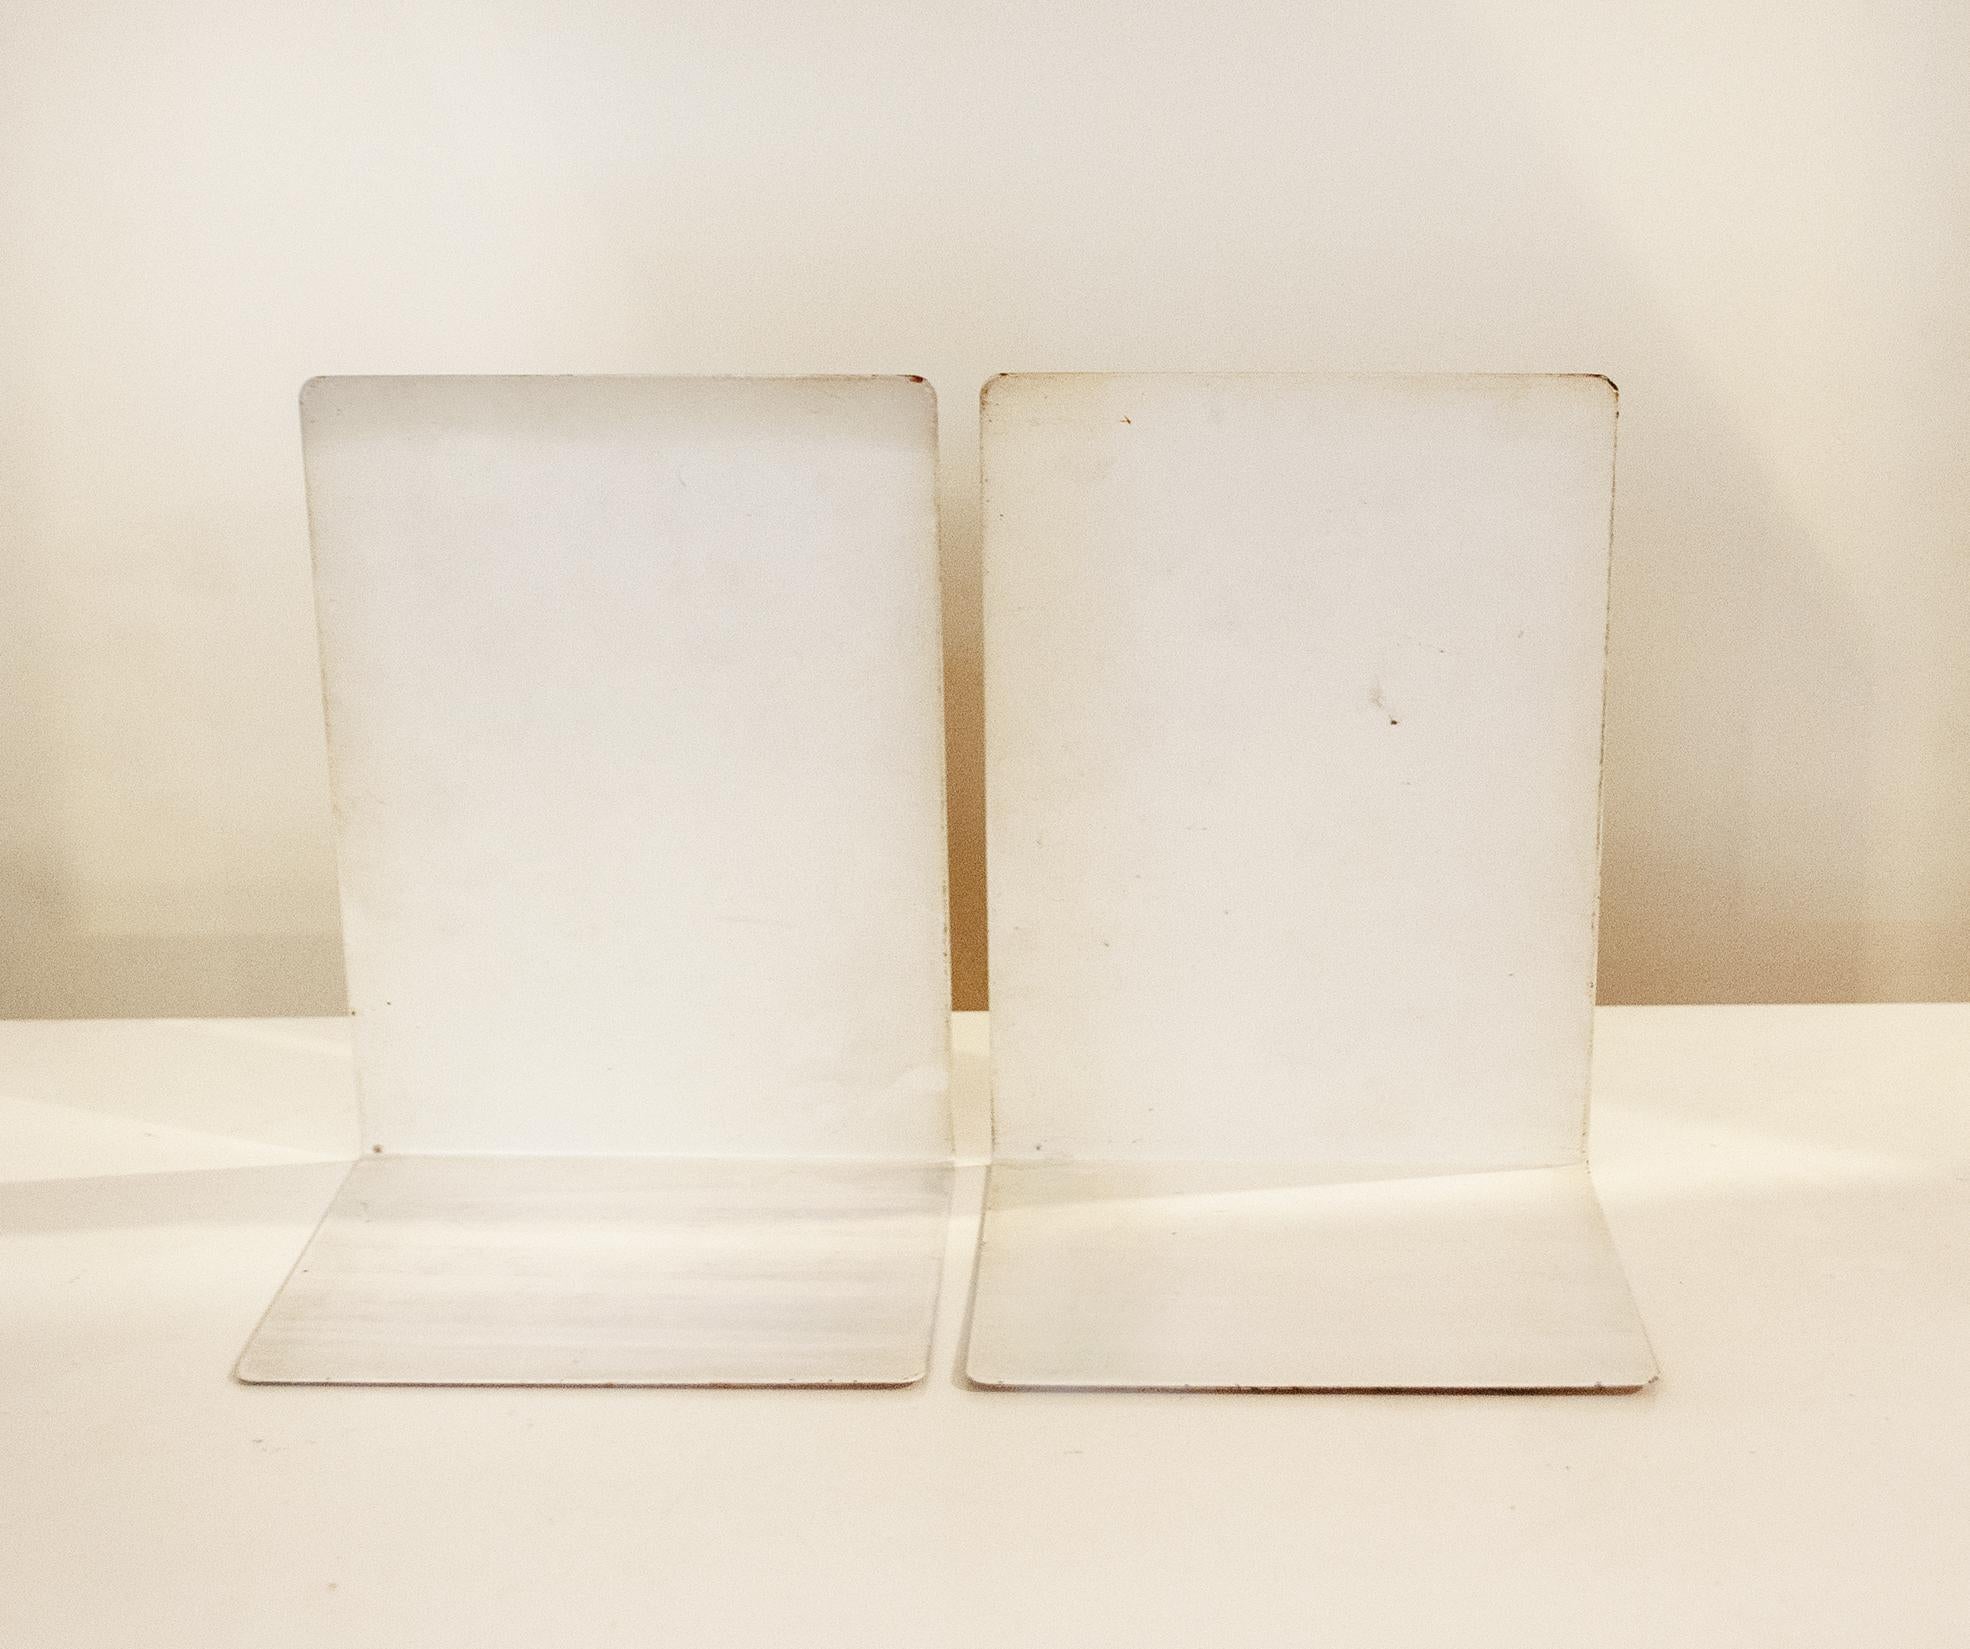 Mid-20th Century Pair of Vintage Bookends by Fornasetti for Atelier Fornasetti, 1960s For Sale